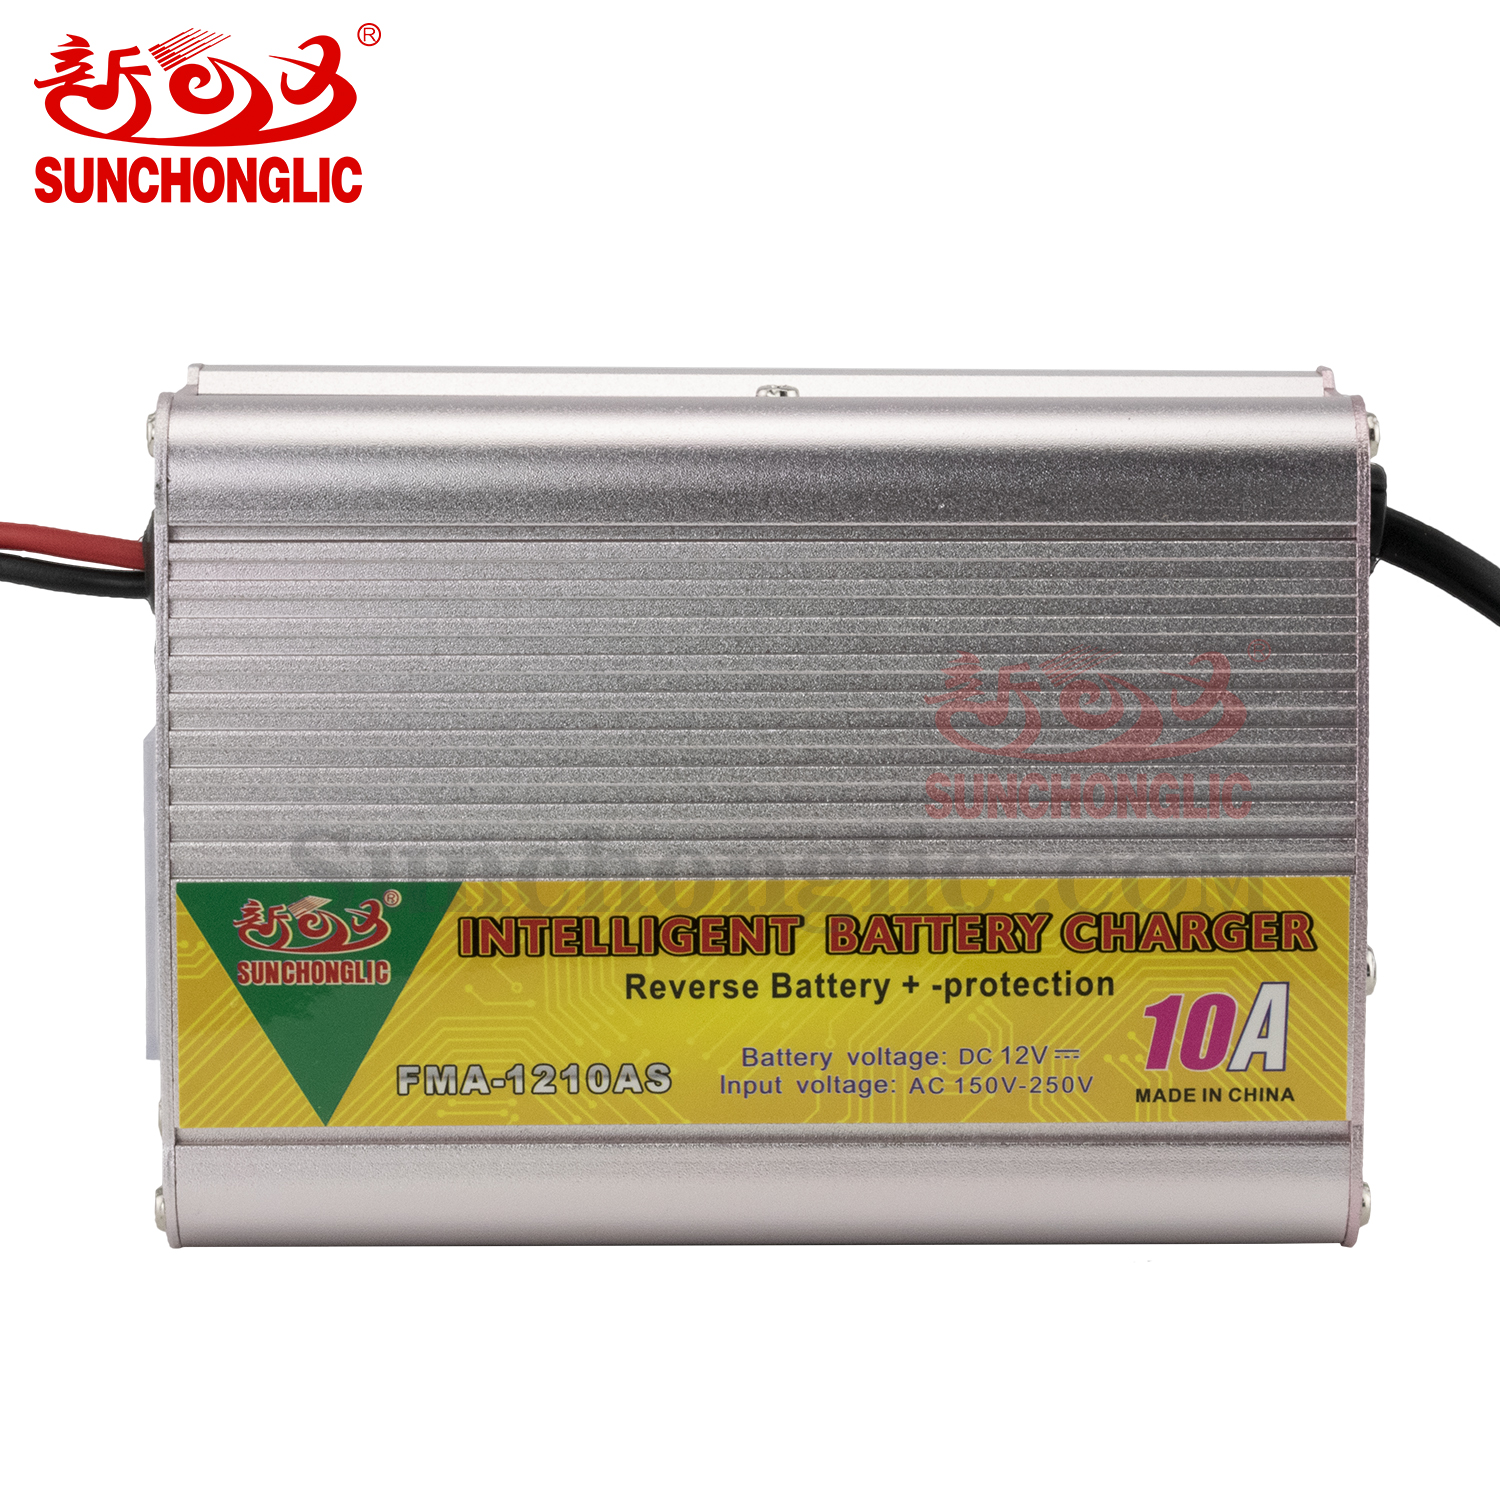 Three stage 12V 10 amp AGM lead acid battery charger